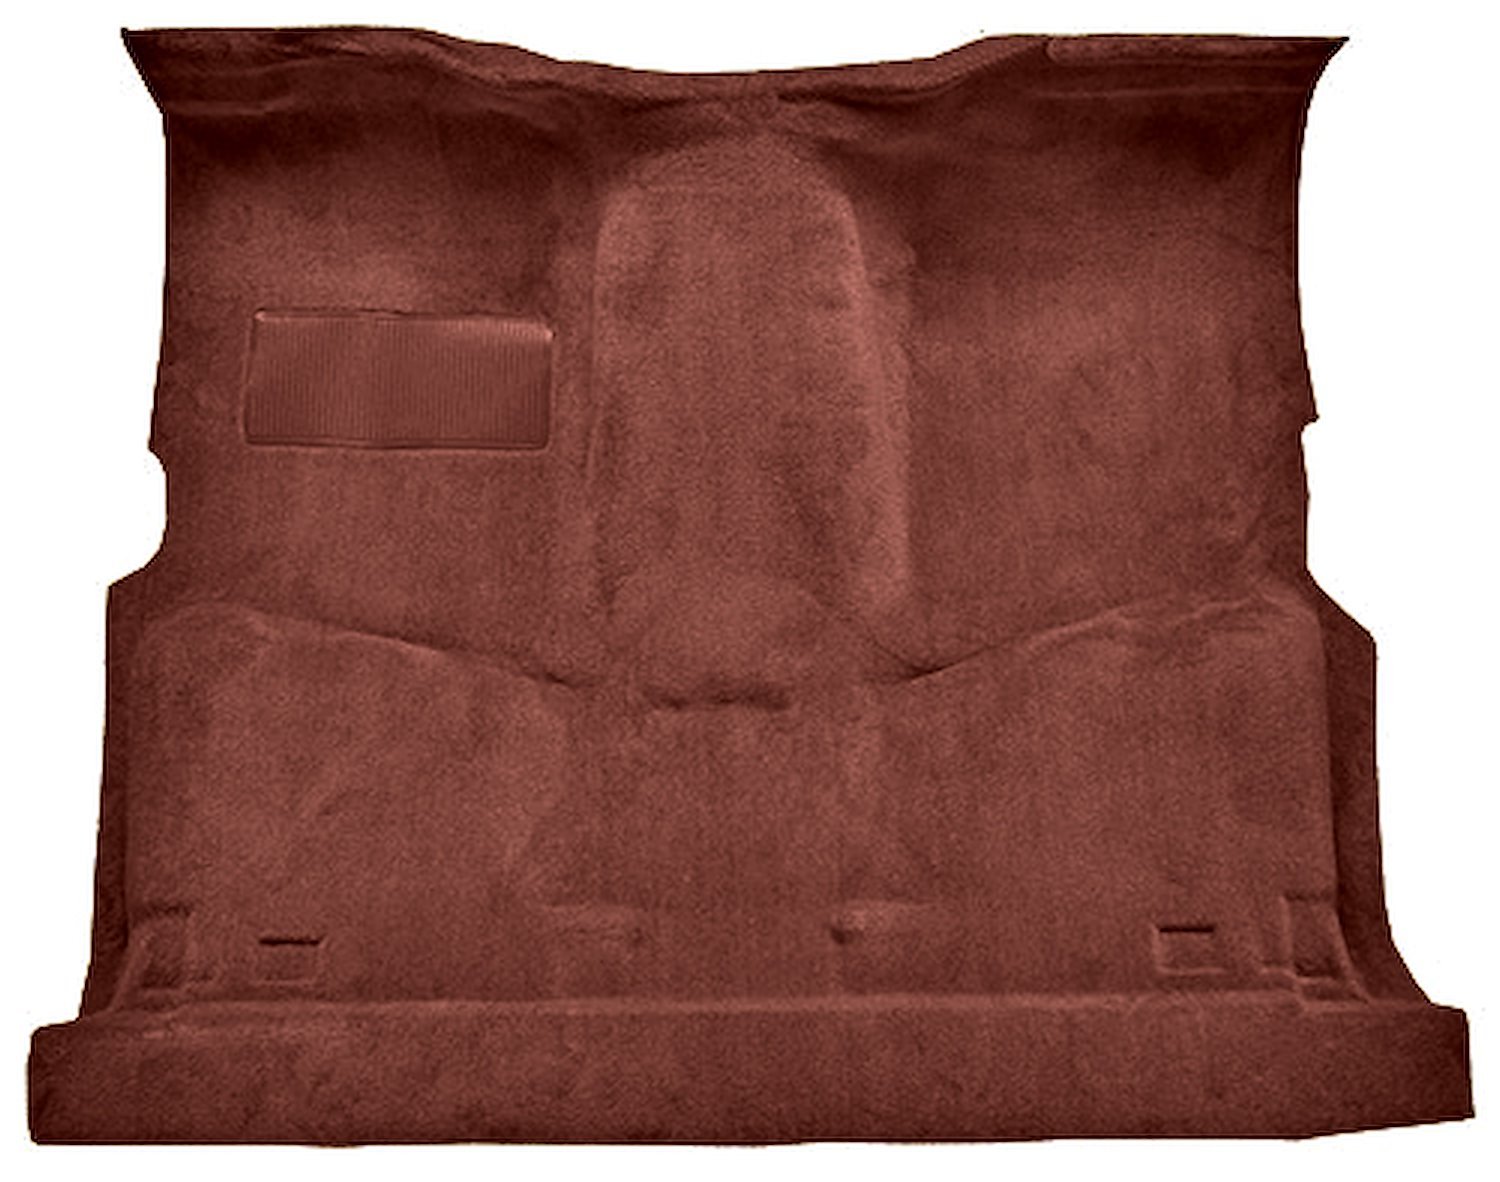 Molded Cut Pile Carpet for 1981-1986 GM C Series Regular Cab Trucks w/4-Speed [Mass Backing, Maple/Canyon]